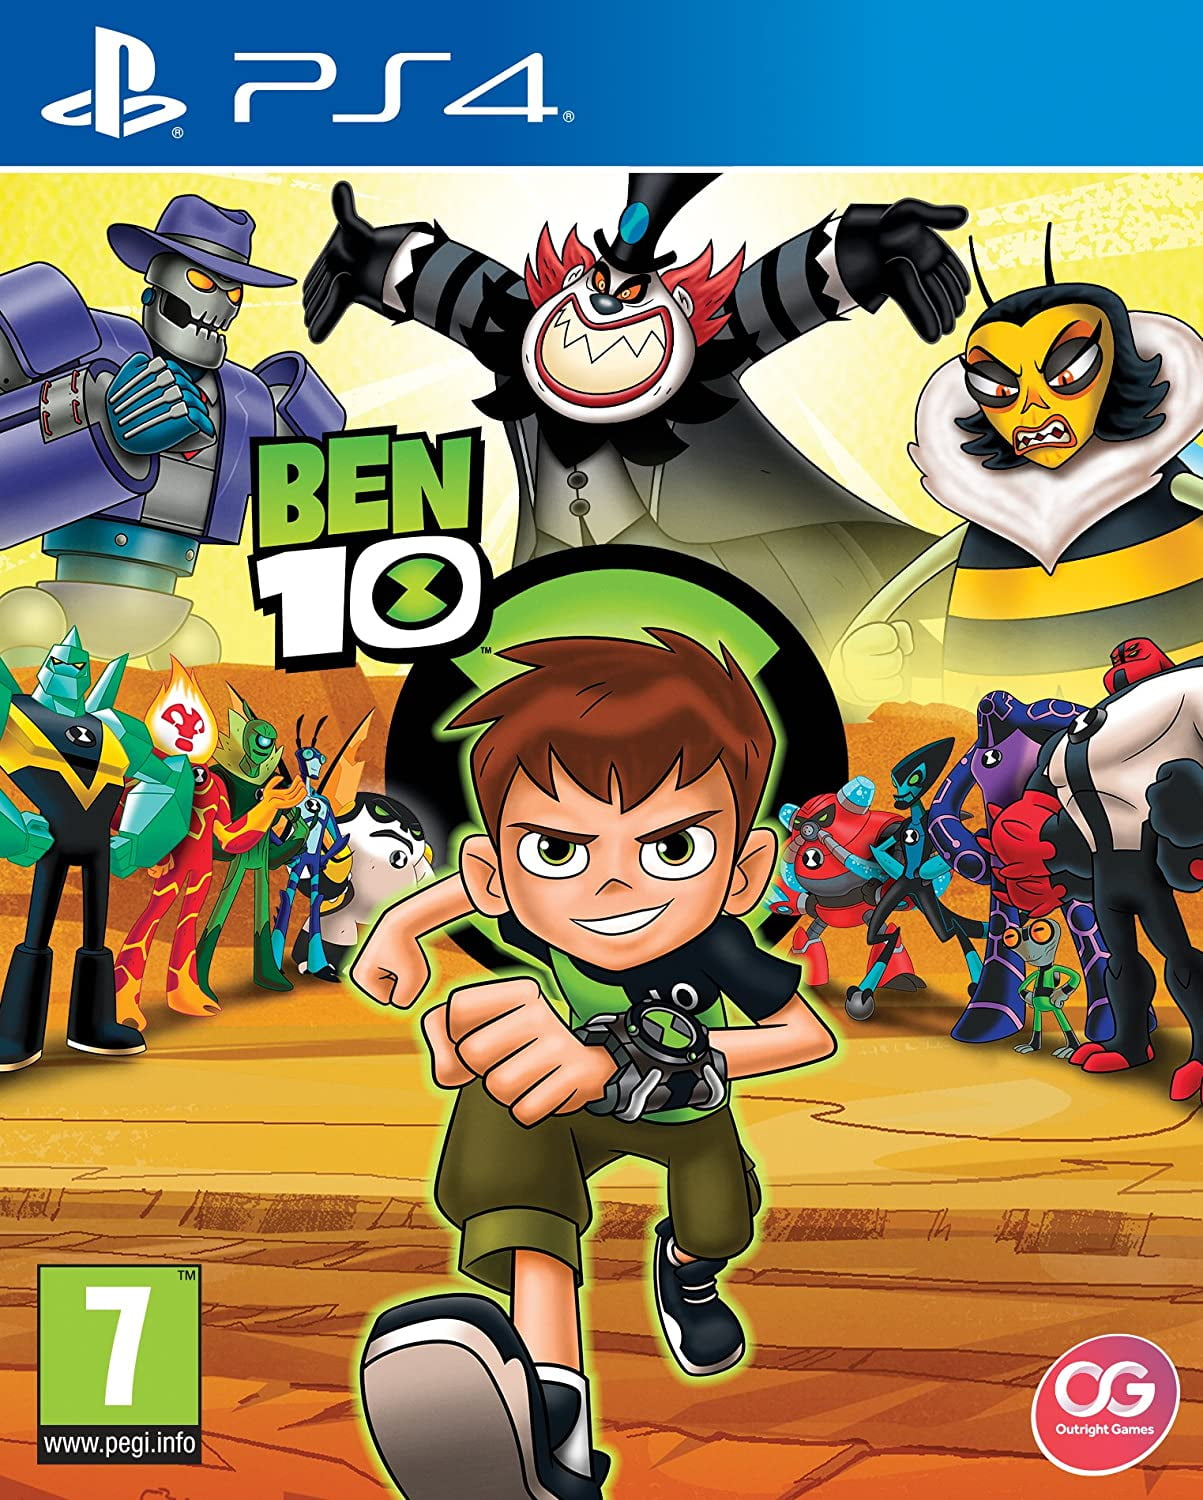 Time to hero up in BEN 10: POWER TRIP launching today on Playstation® 4,  Nintendo Switch™, Xbox One, PC digital